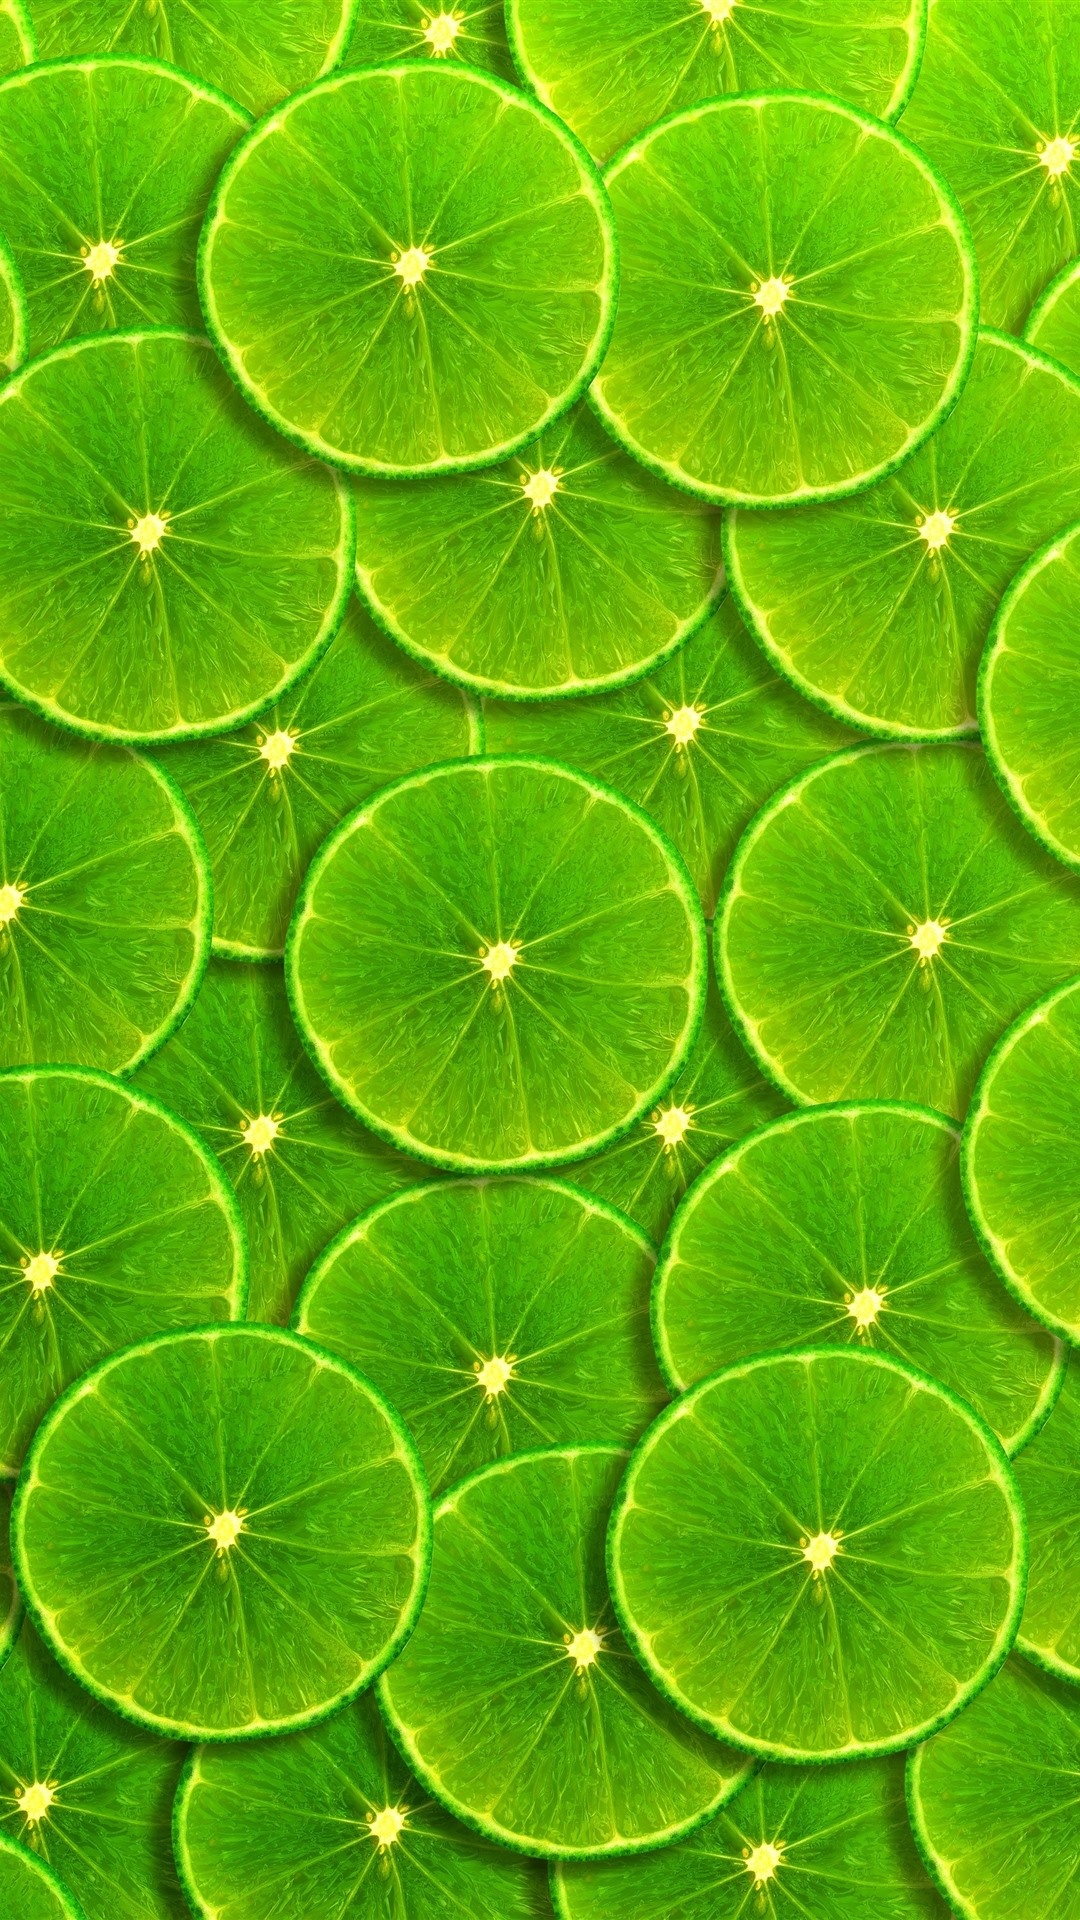 Lime green iPhone wallpaper, Vibrant and eye-catching, Green citrus, Citrus zest, 1080x1920 Full HD Phone